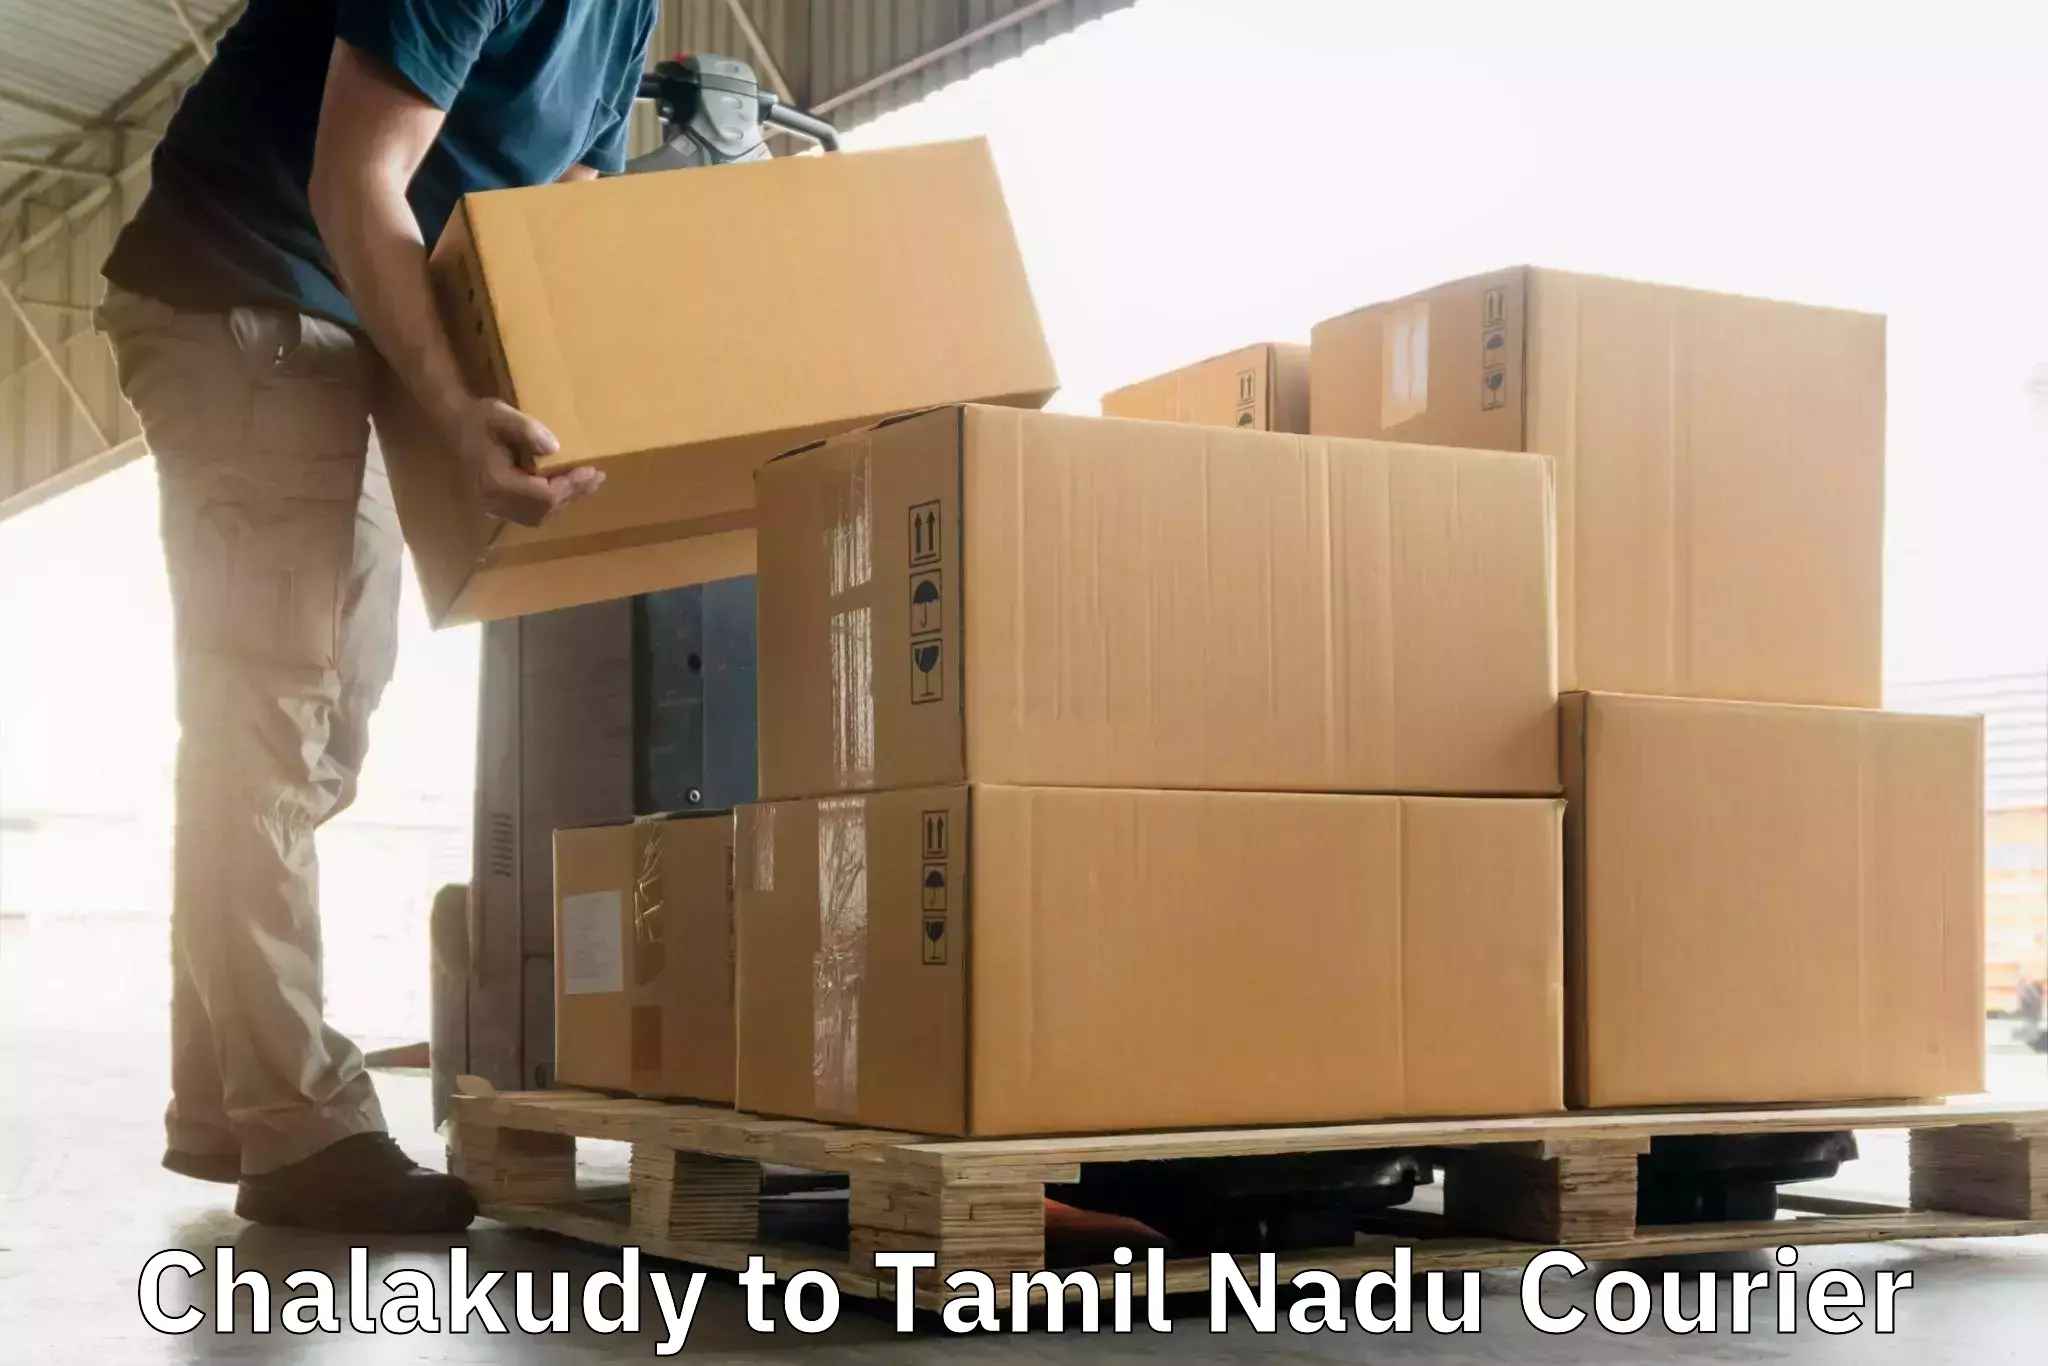 On-call courier service Chalakudy to Kovilpatti